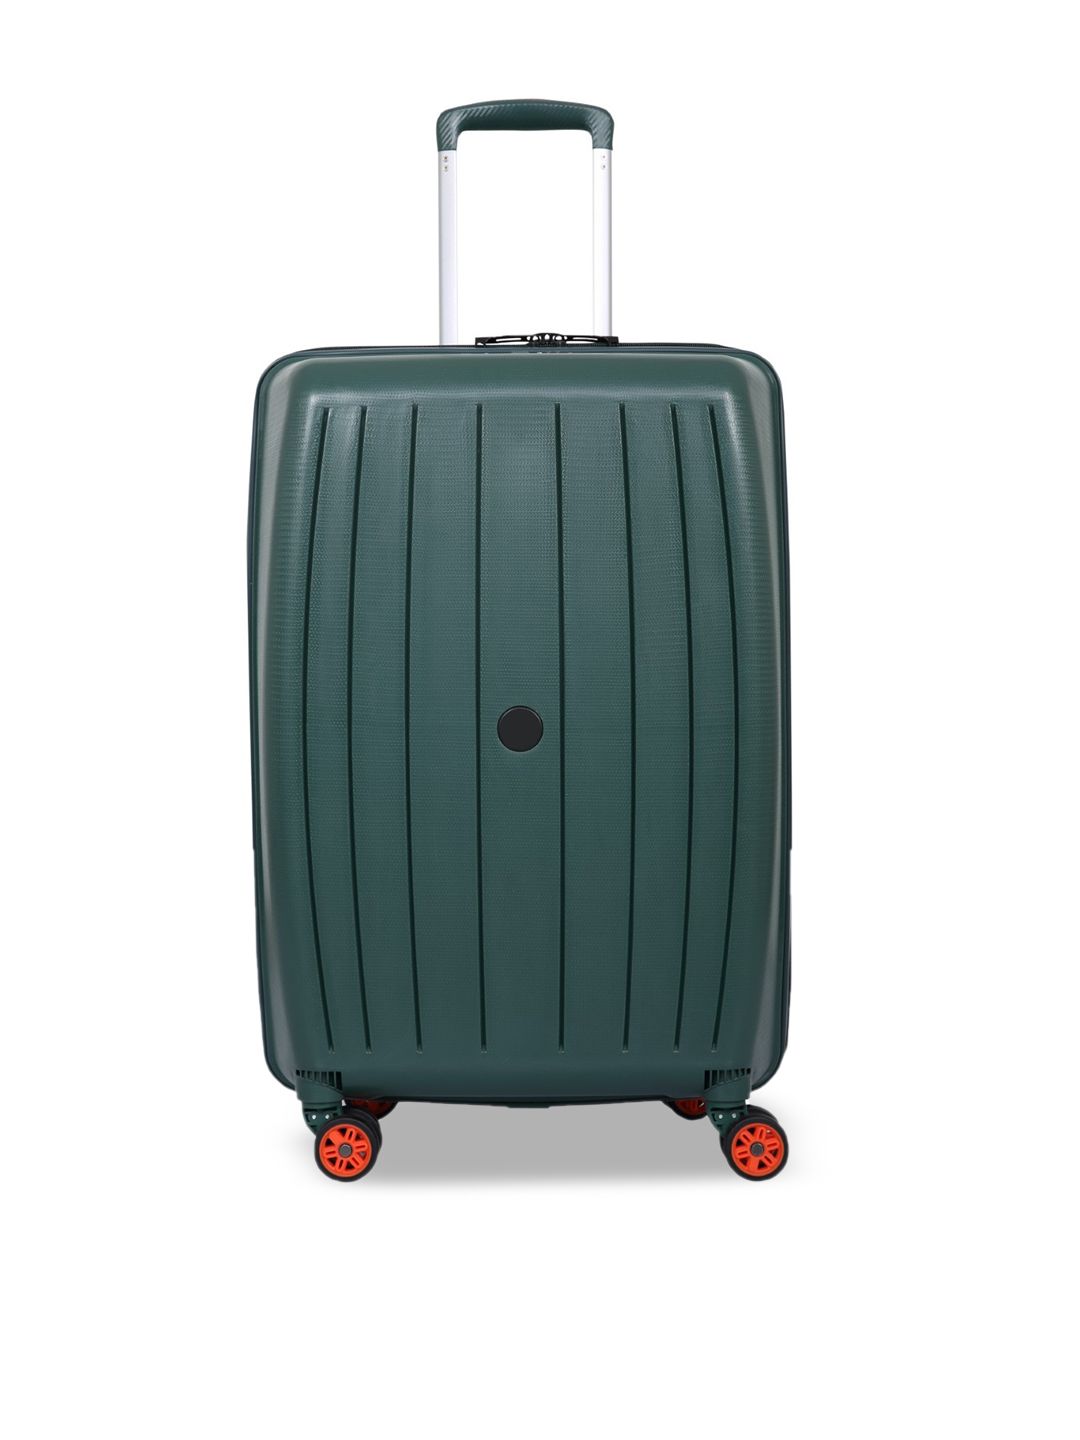 Polo Class Green 28 Inch Trolley Bag Price in India